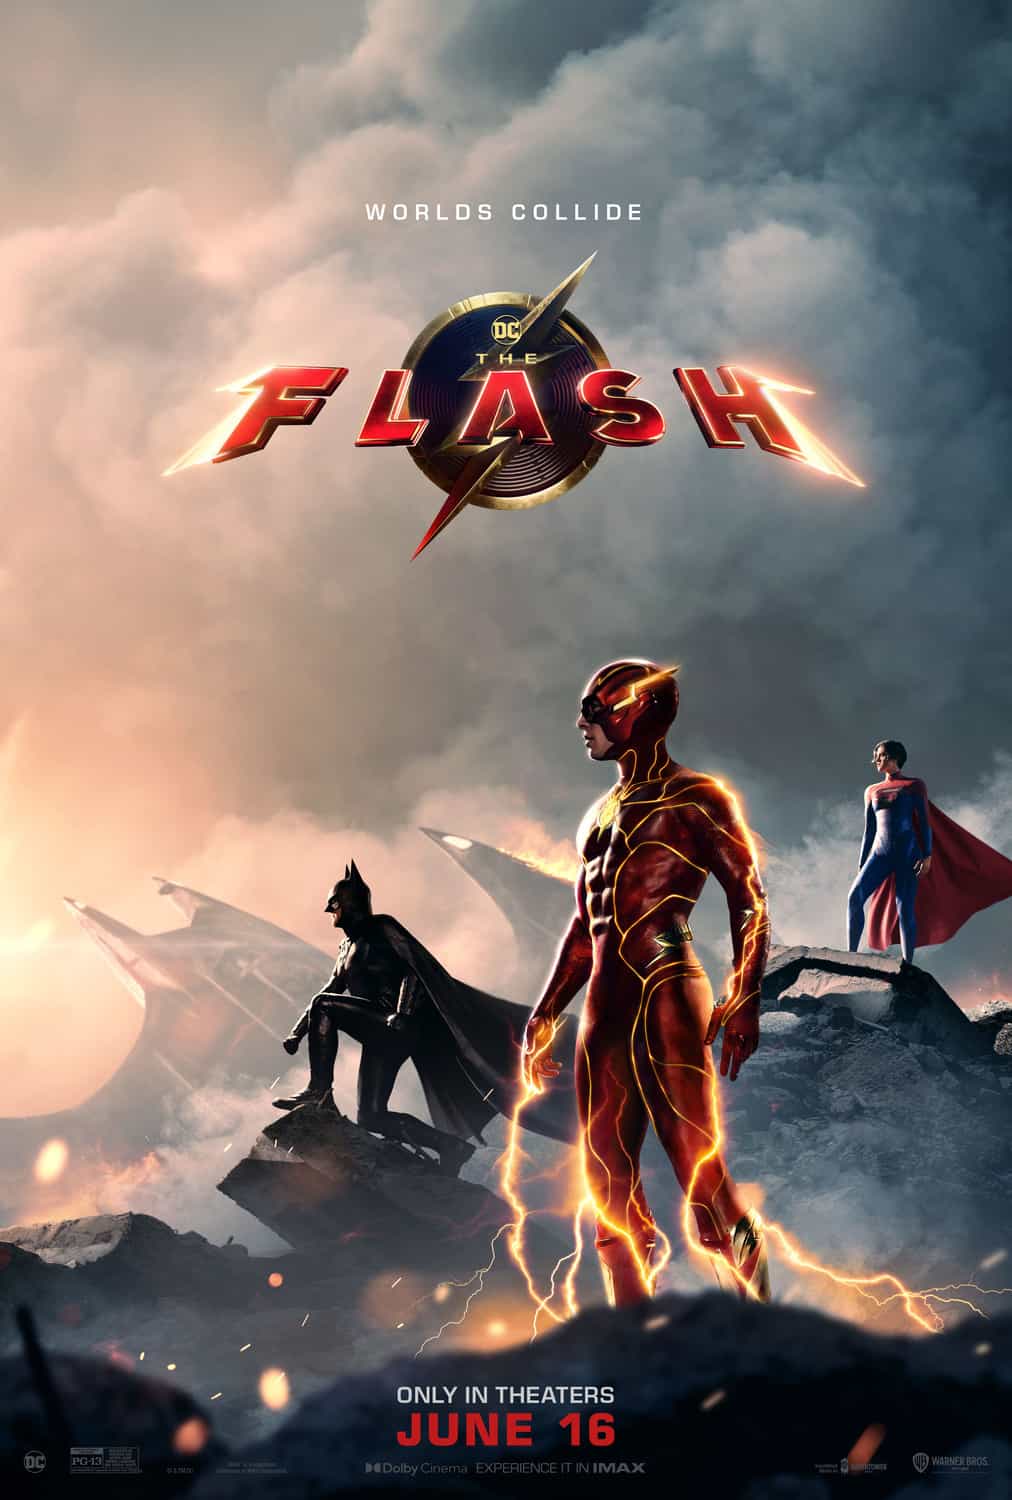 A full trailer has been released for The Flash which stars Ezra Miller - movie UK release date 23rd June 2023 #theflash